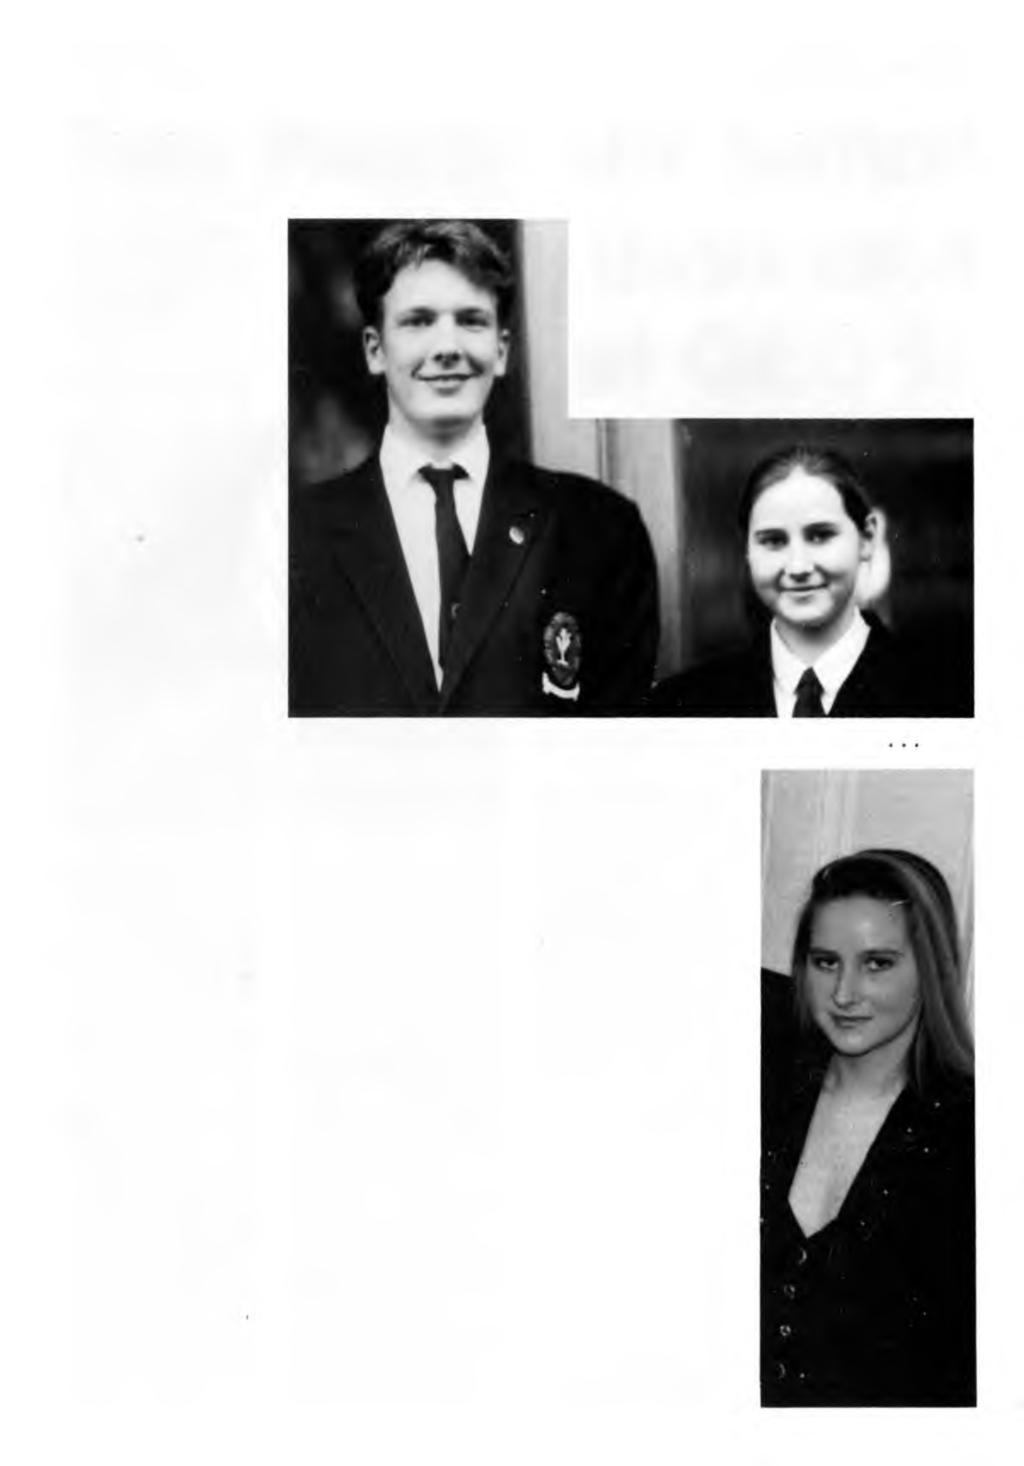 AUTUMN 1994 MAGISTER - PAGE 23 Two Heads are better Magister talks to William Coleman and Virginia Hayton, Head Boy and Head Girl 93/94 than one at QEGS!